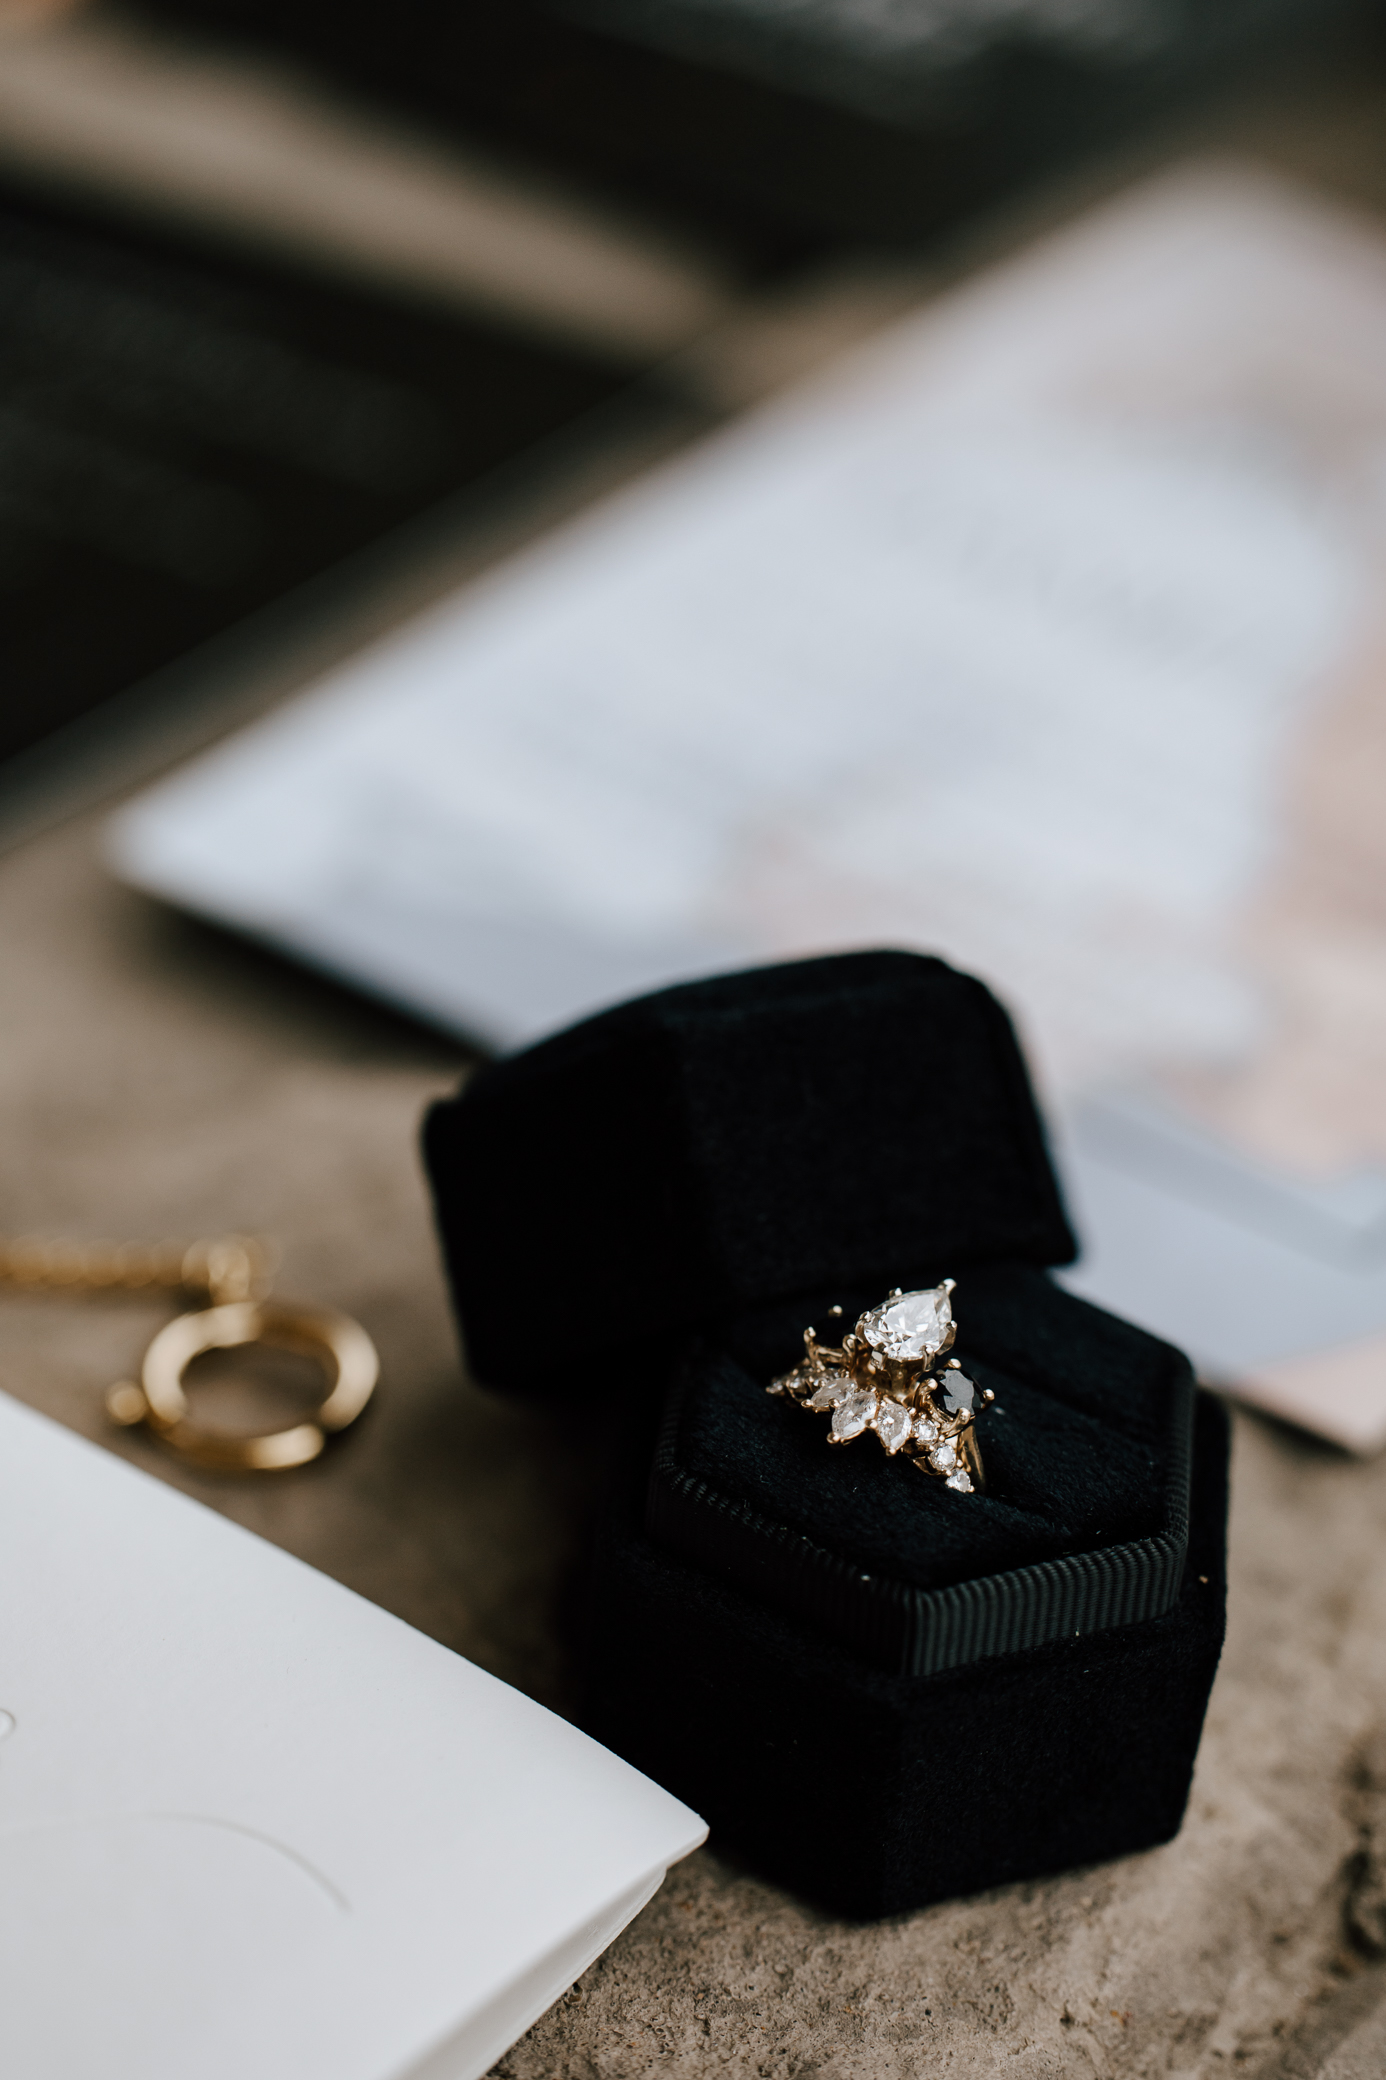 A bride's gold wedding set is shown in a black ring box. The engagement ring features two black diamonds surrounding one large pear cut diamond and the wedding band features several white marquise cut diamonds.